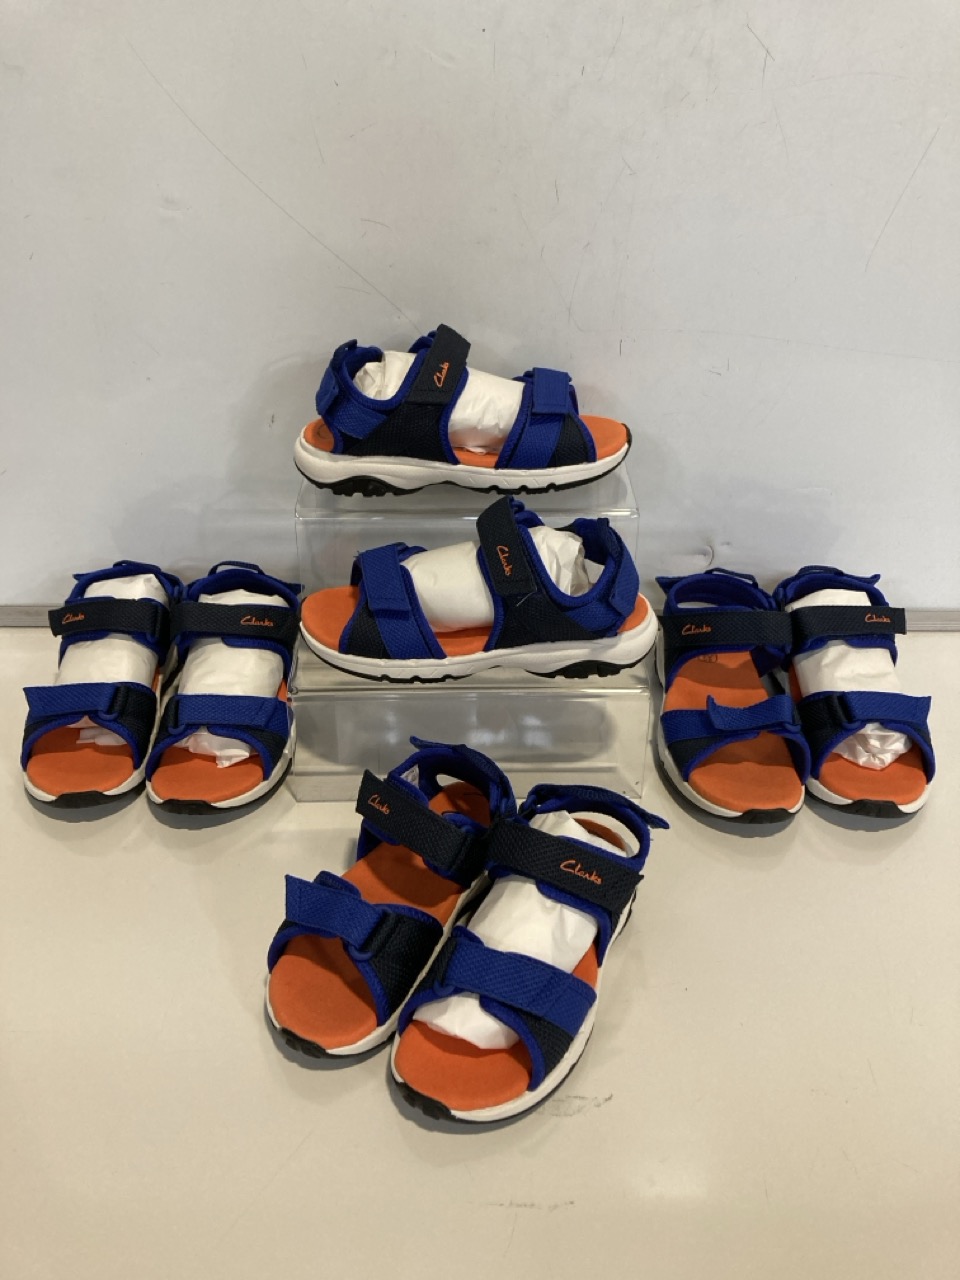 4 X PAIRS OF CLARKS CHILDREN'S FOOTWEAR TO INCLUDE CLARKS EXPO SEA K IN NAVY COMBIB SANDALS SIZE 12.5 UK